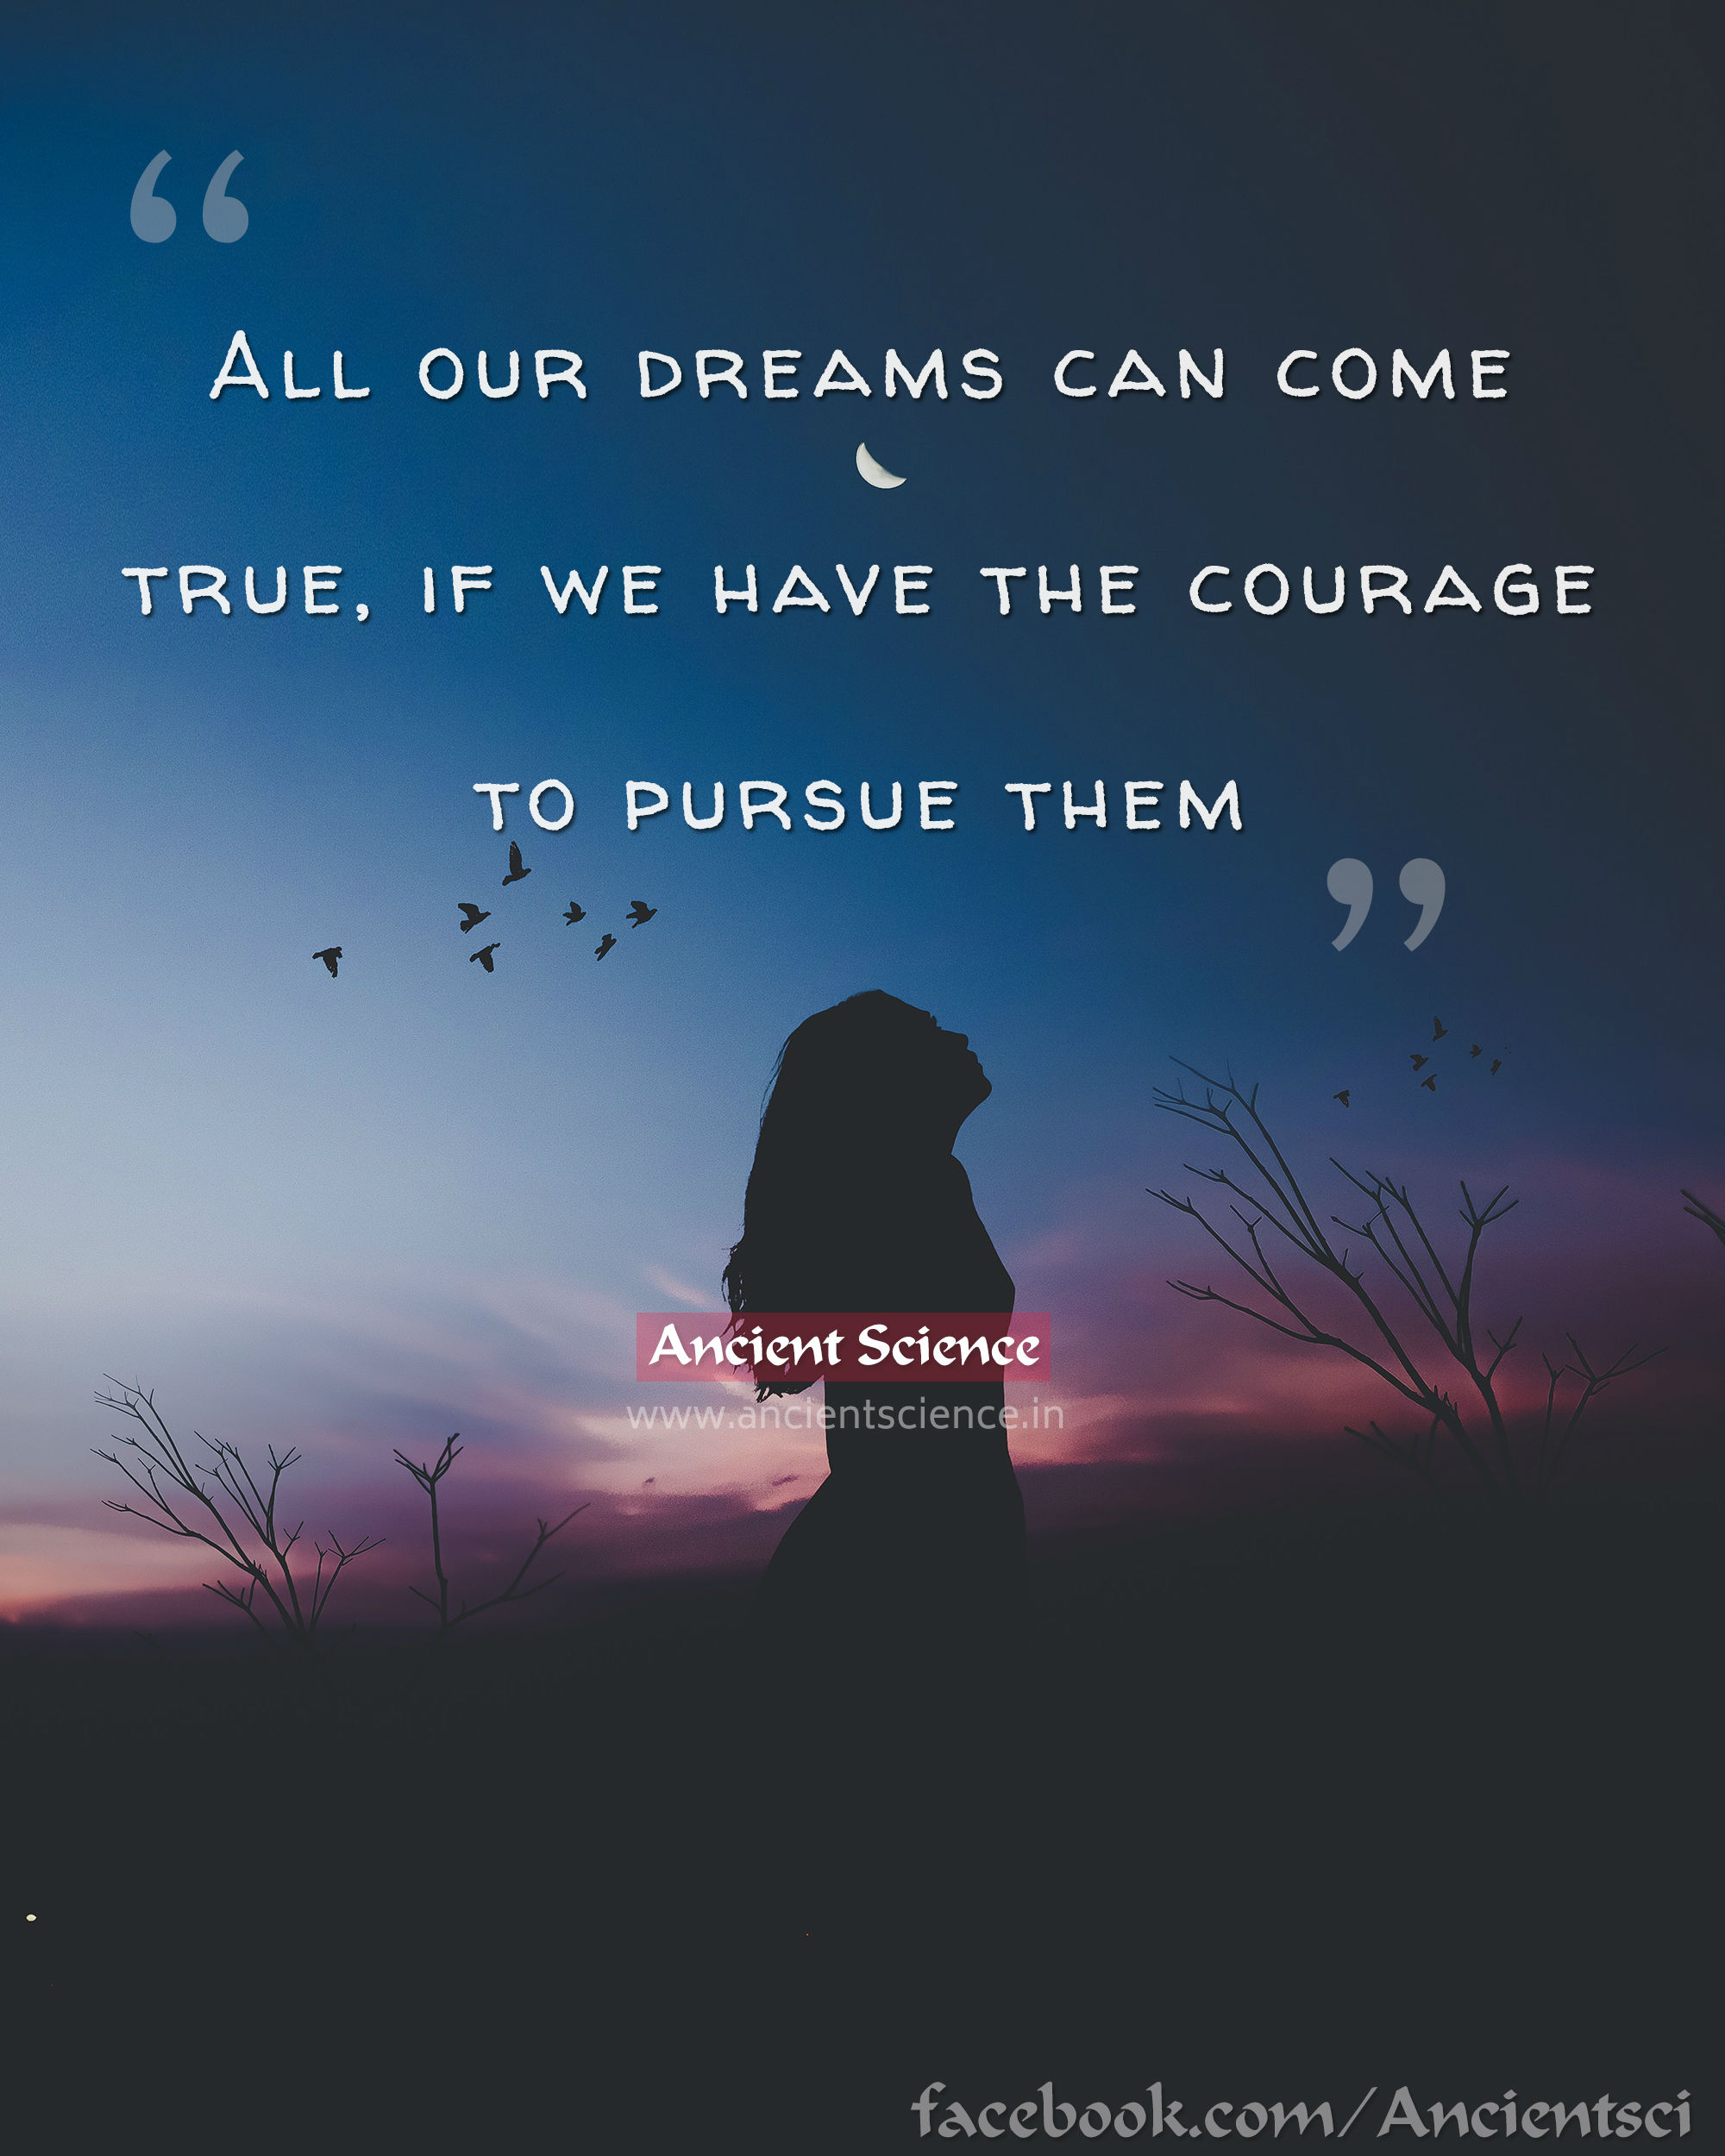 all our dreams can come true if we have the courage to pursue them